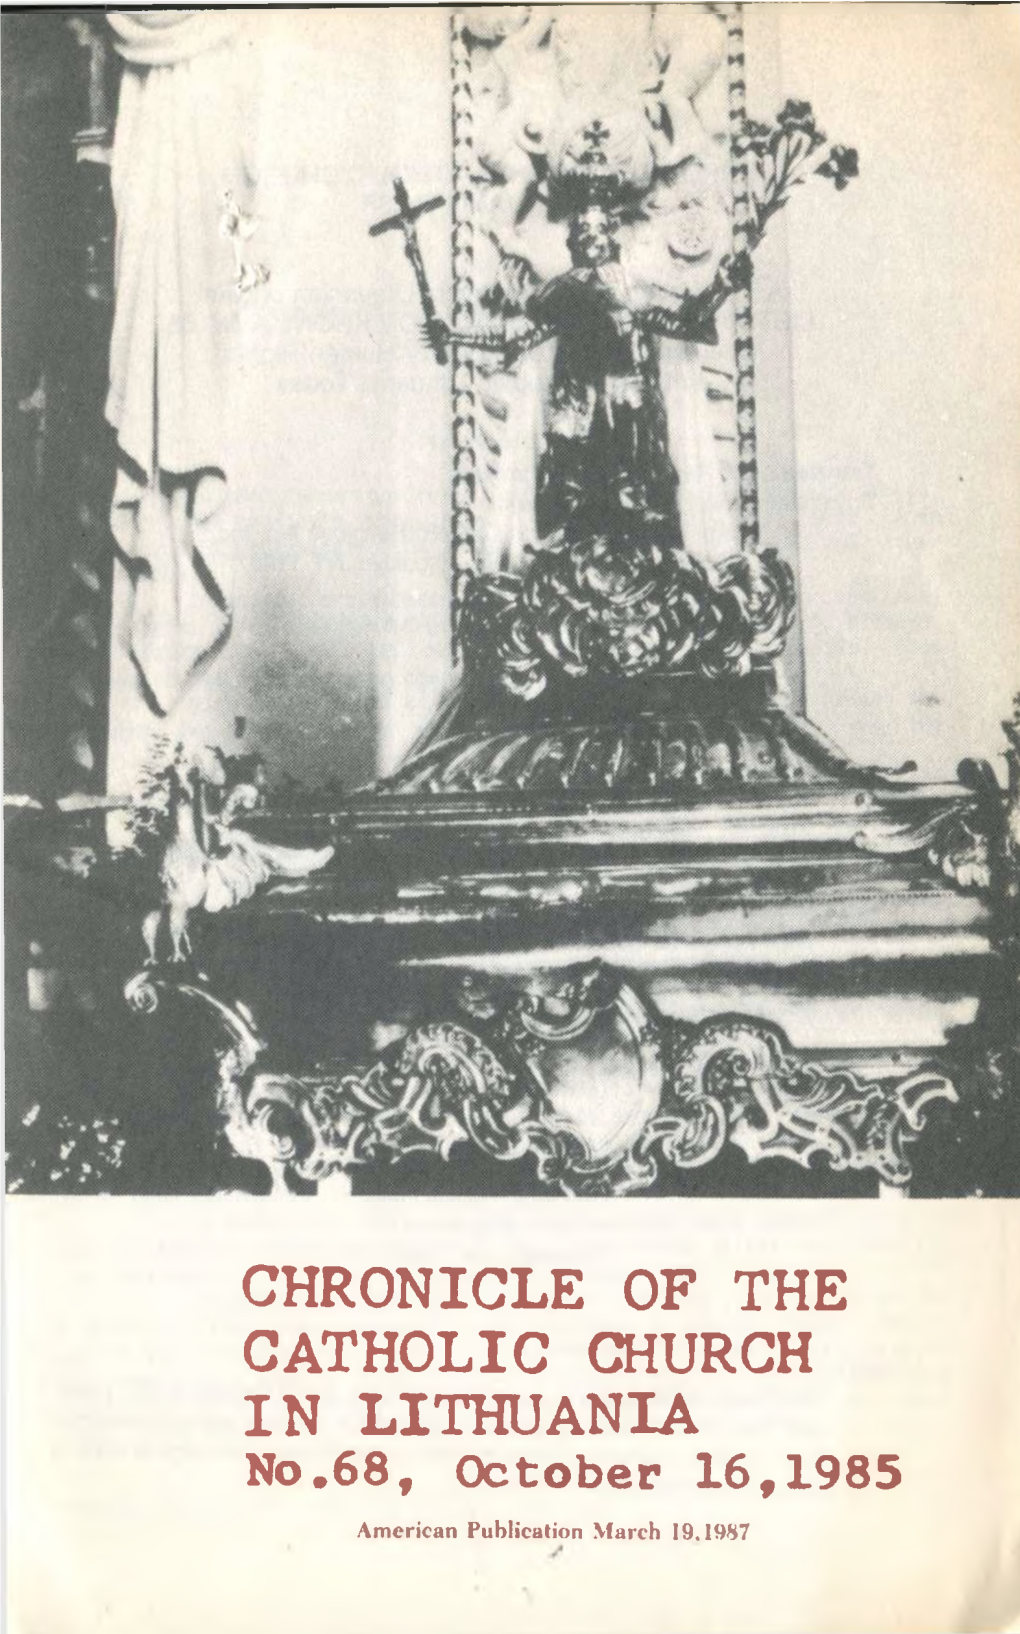 CHRONICLE of the CATHOLIC CHURCH in LITHUANIA No.68, October 16,1985